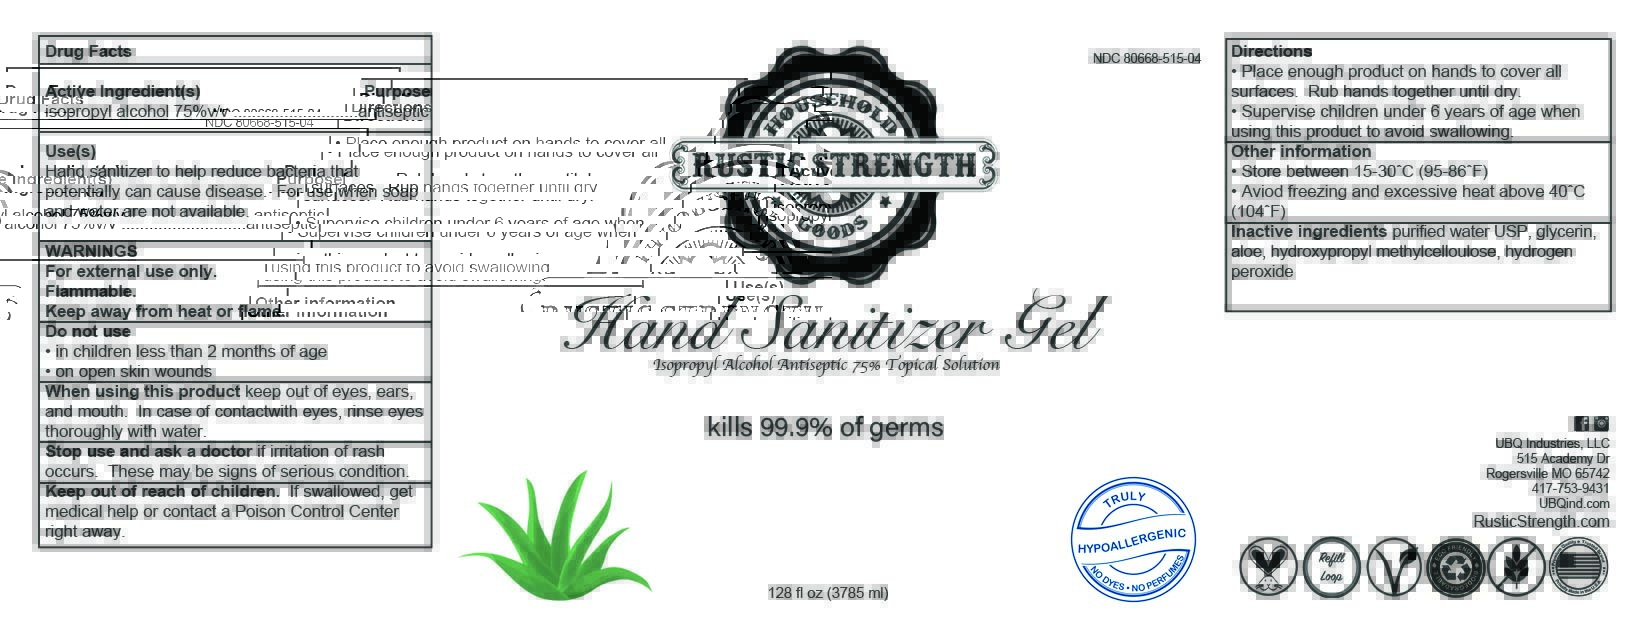 3785 ml label - unscented